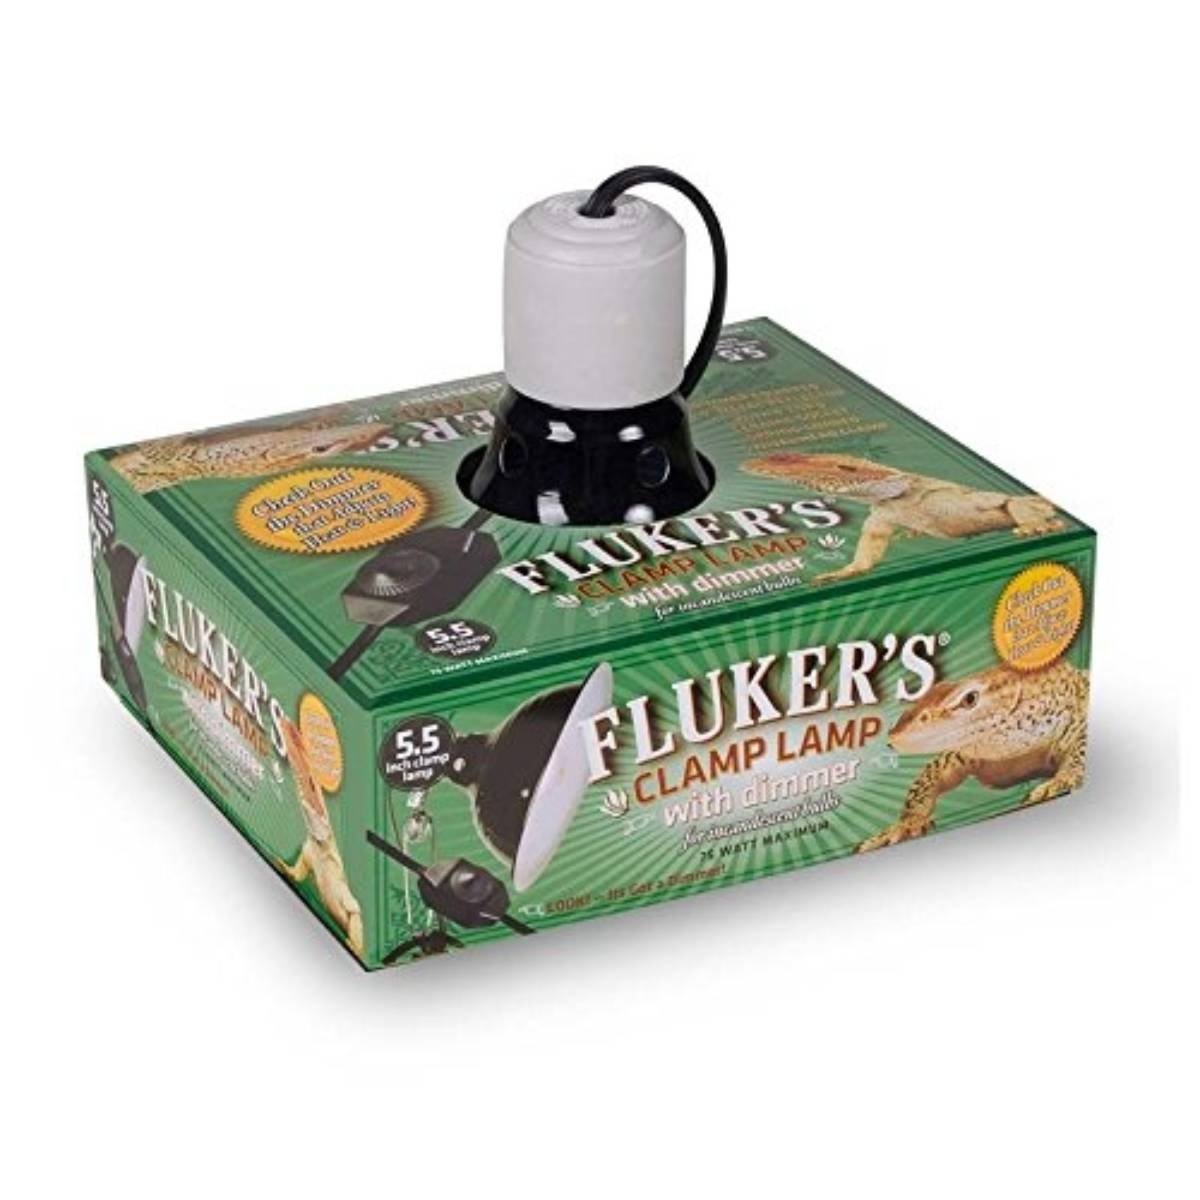 Fluker's Repta-Clamp Lamp with Dimmable Switch (5.5")